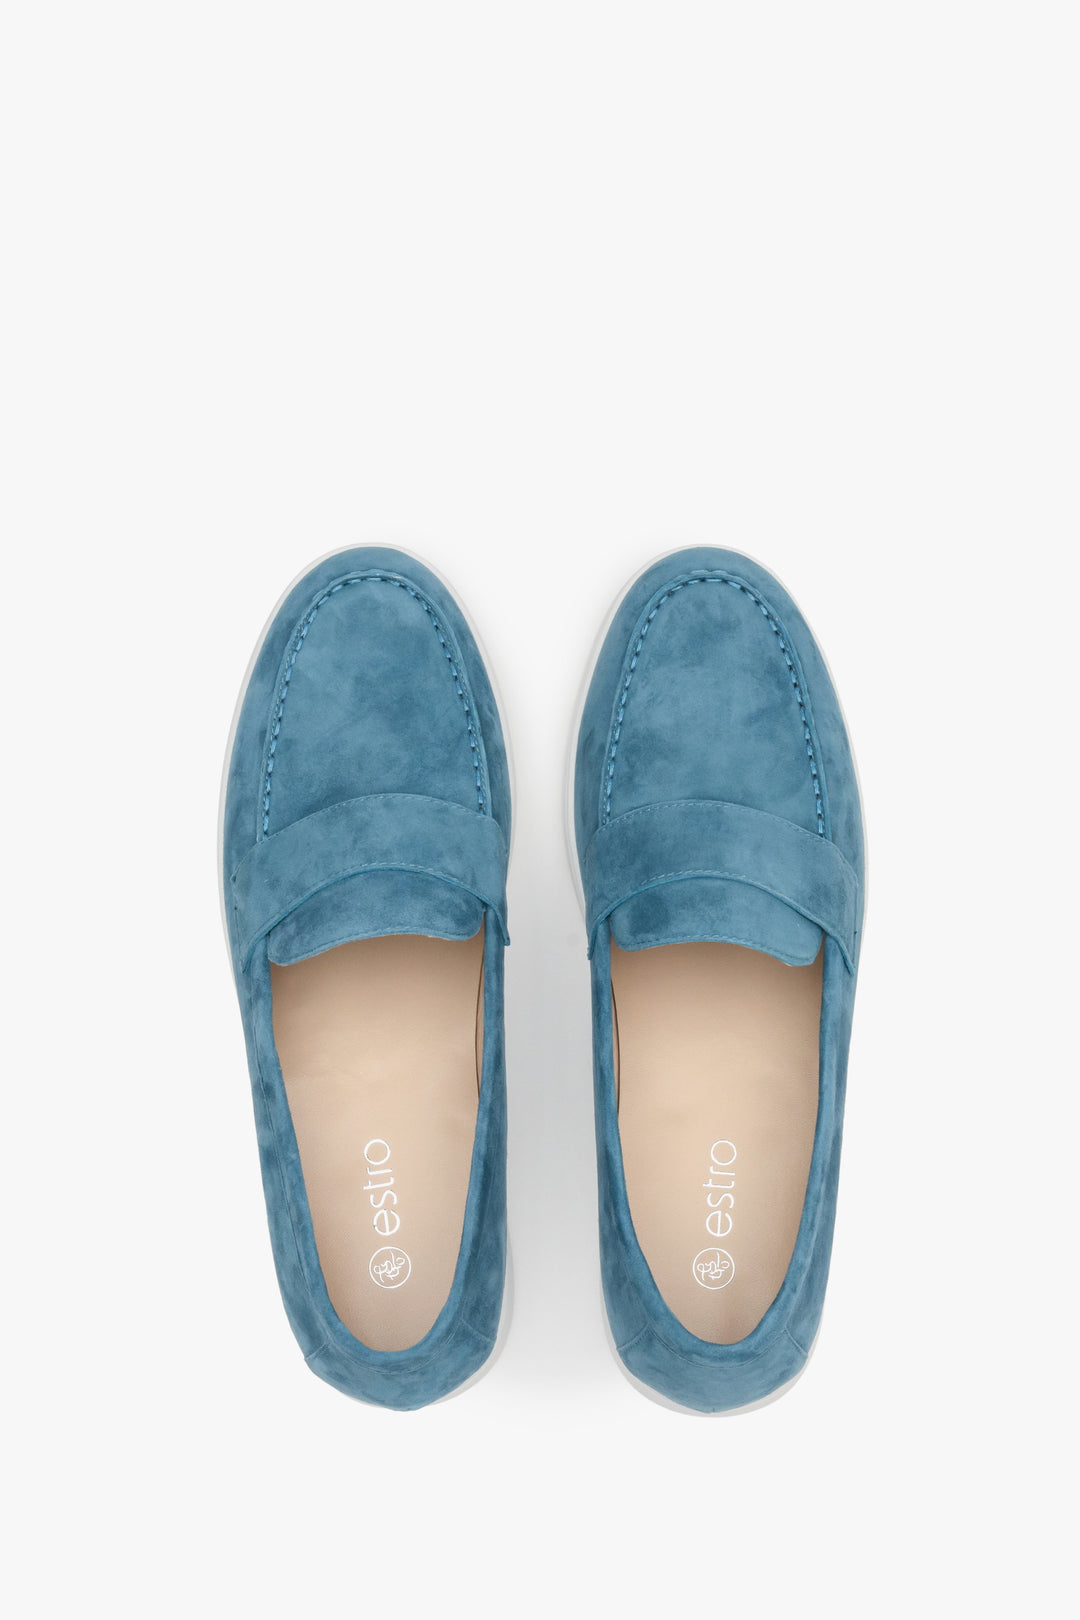 Women's blue Estro moccasins for fall, made of genuine velour - presentation of footwear from above.